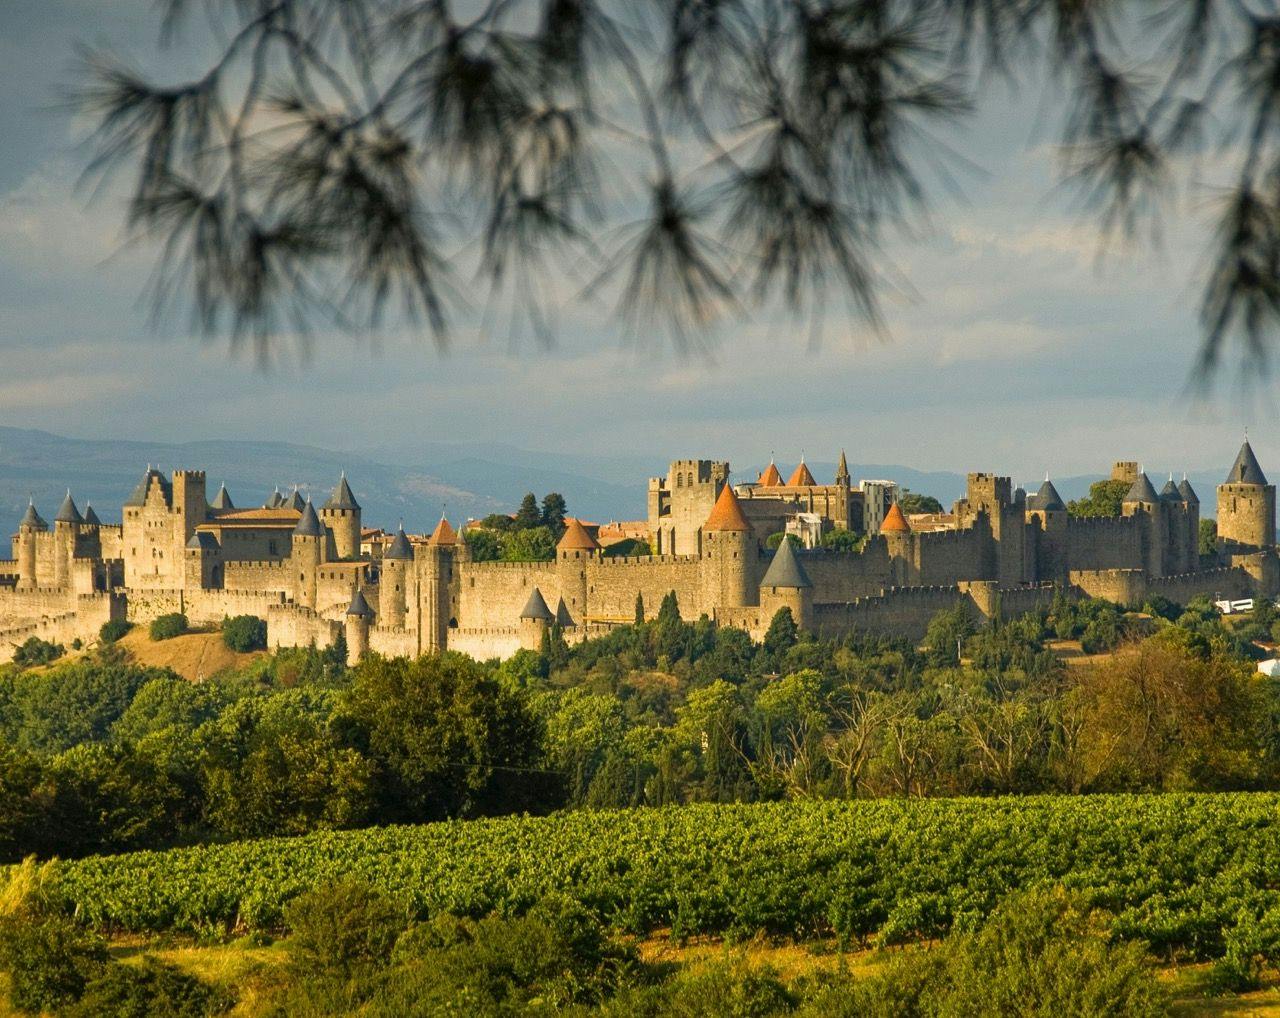 Historical city of Carcassonne in France.